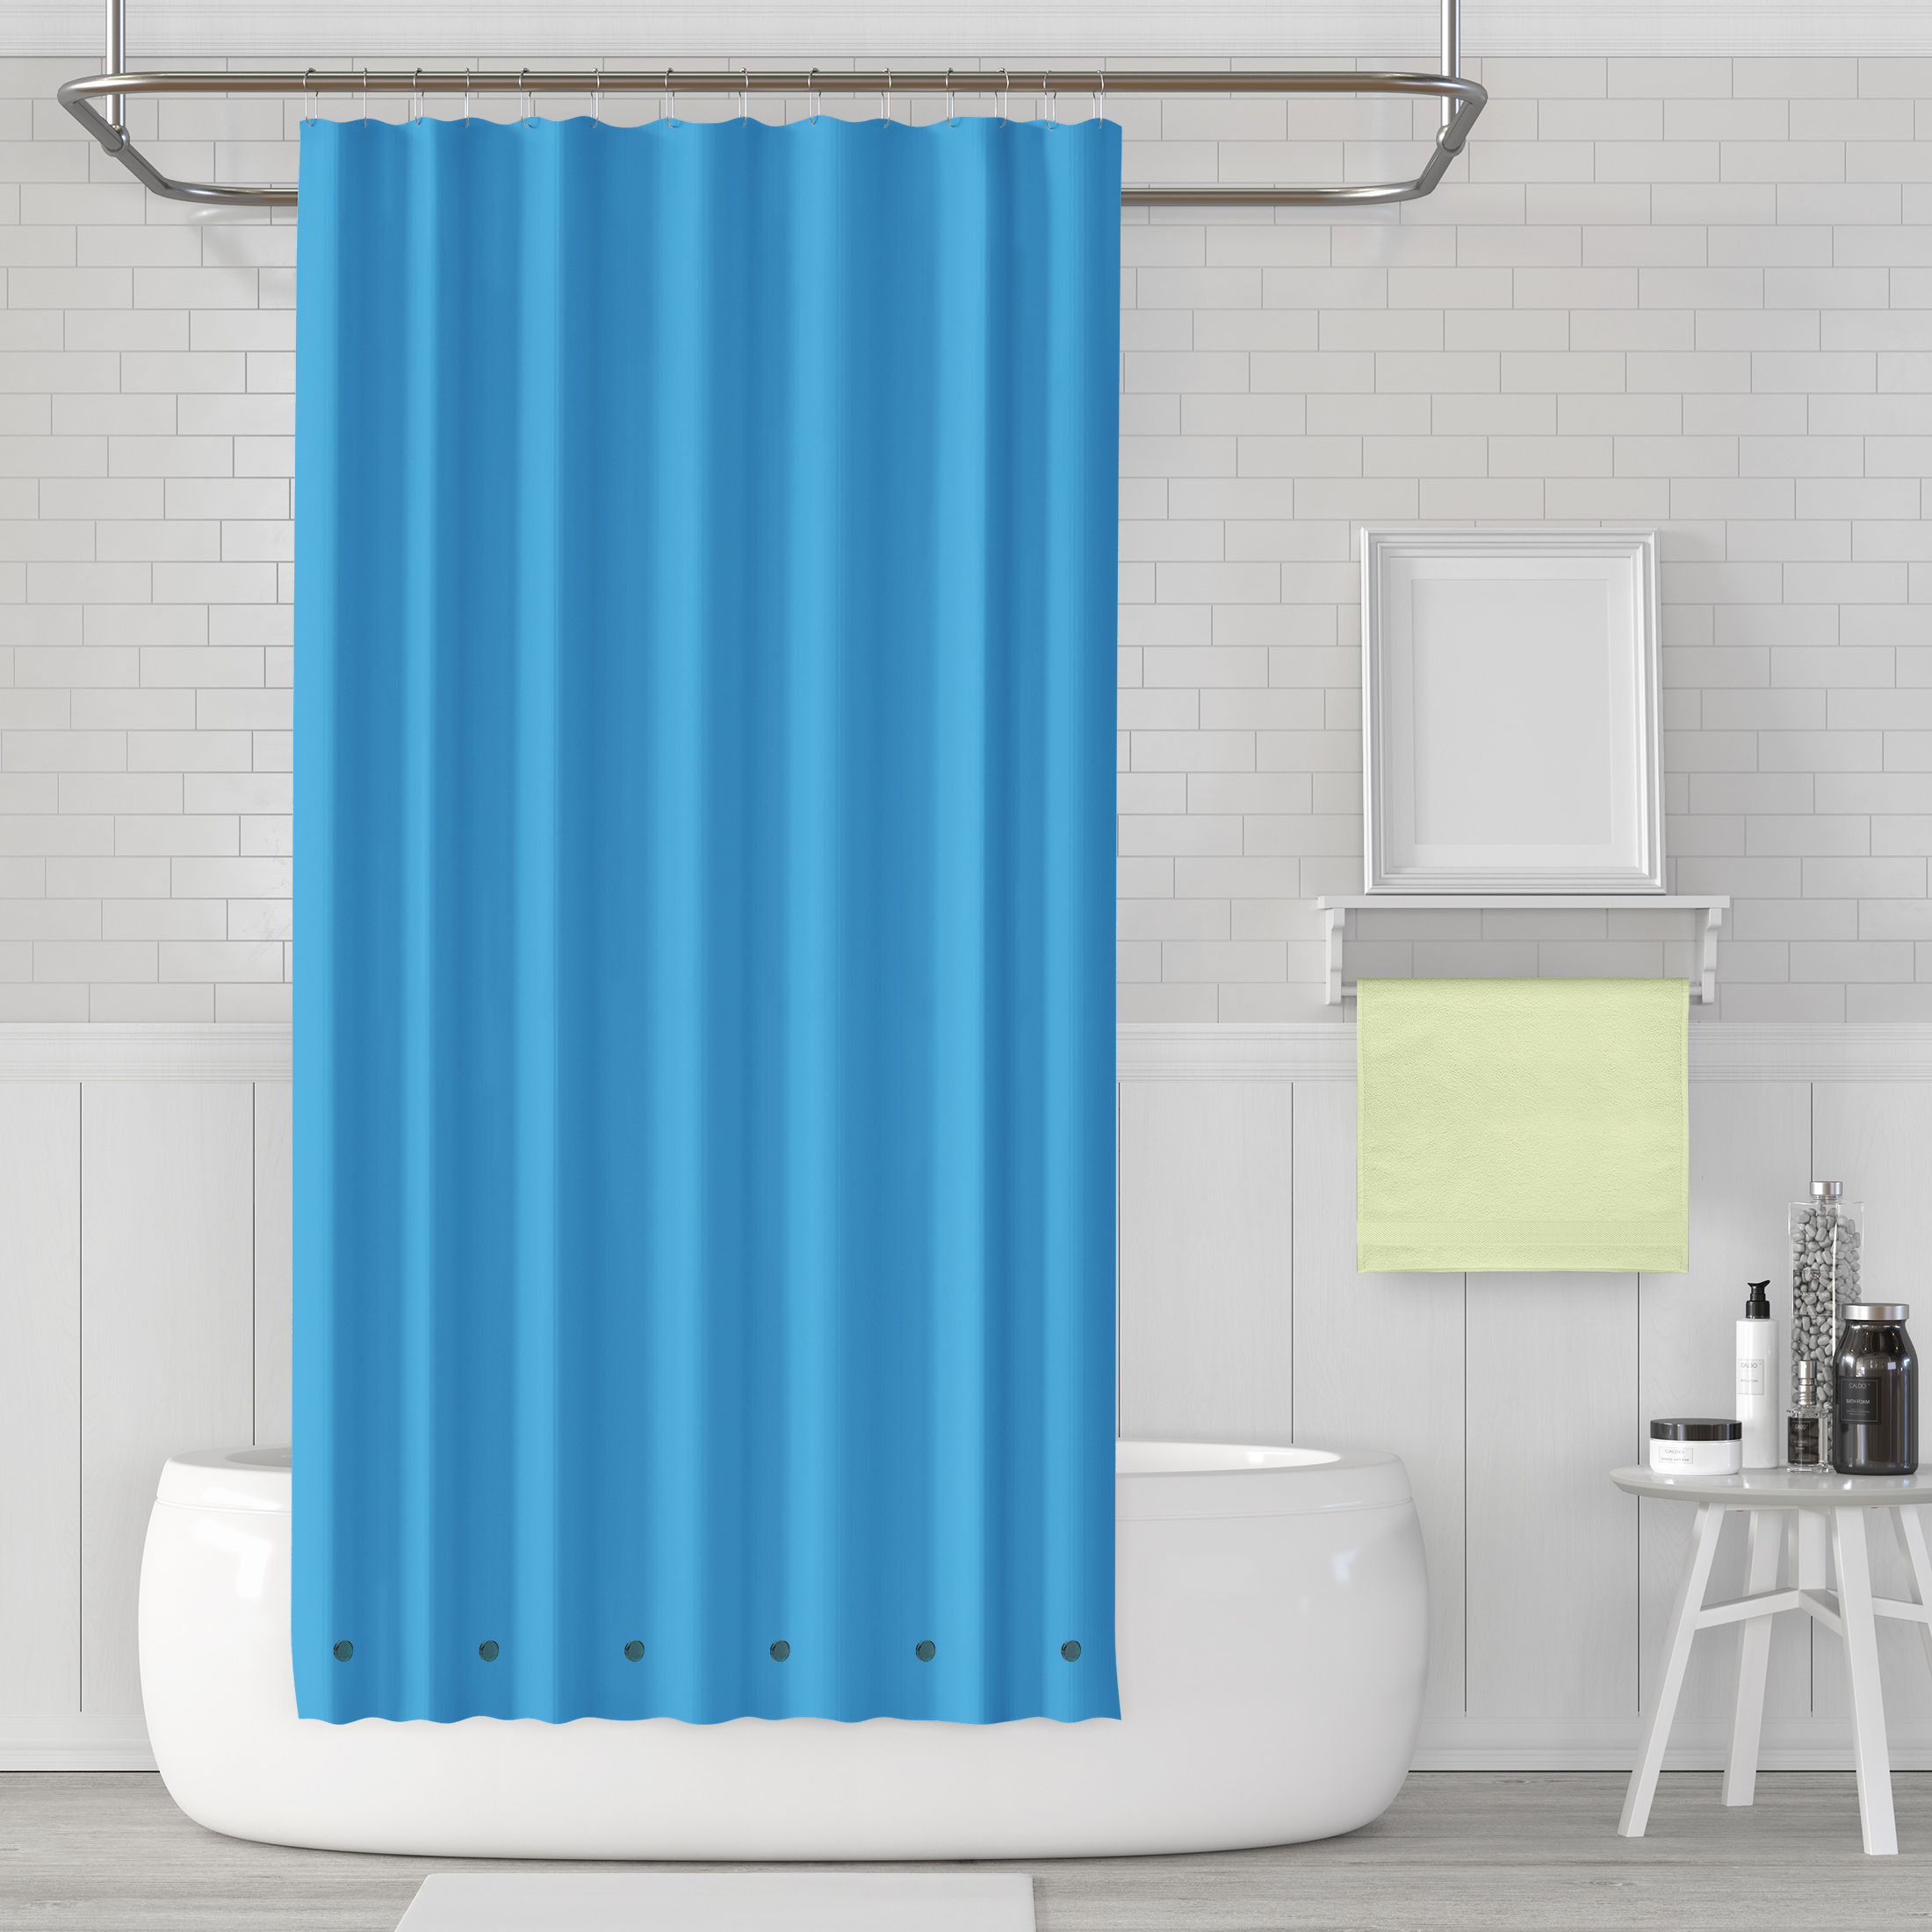 Heavy-Weight Magnetic Shower Curtain Liner - Blue